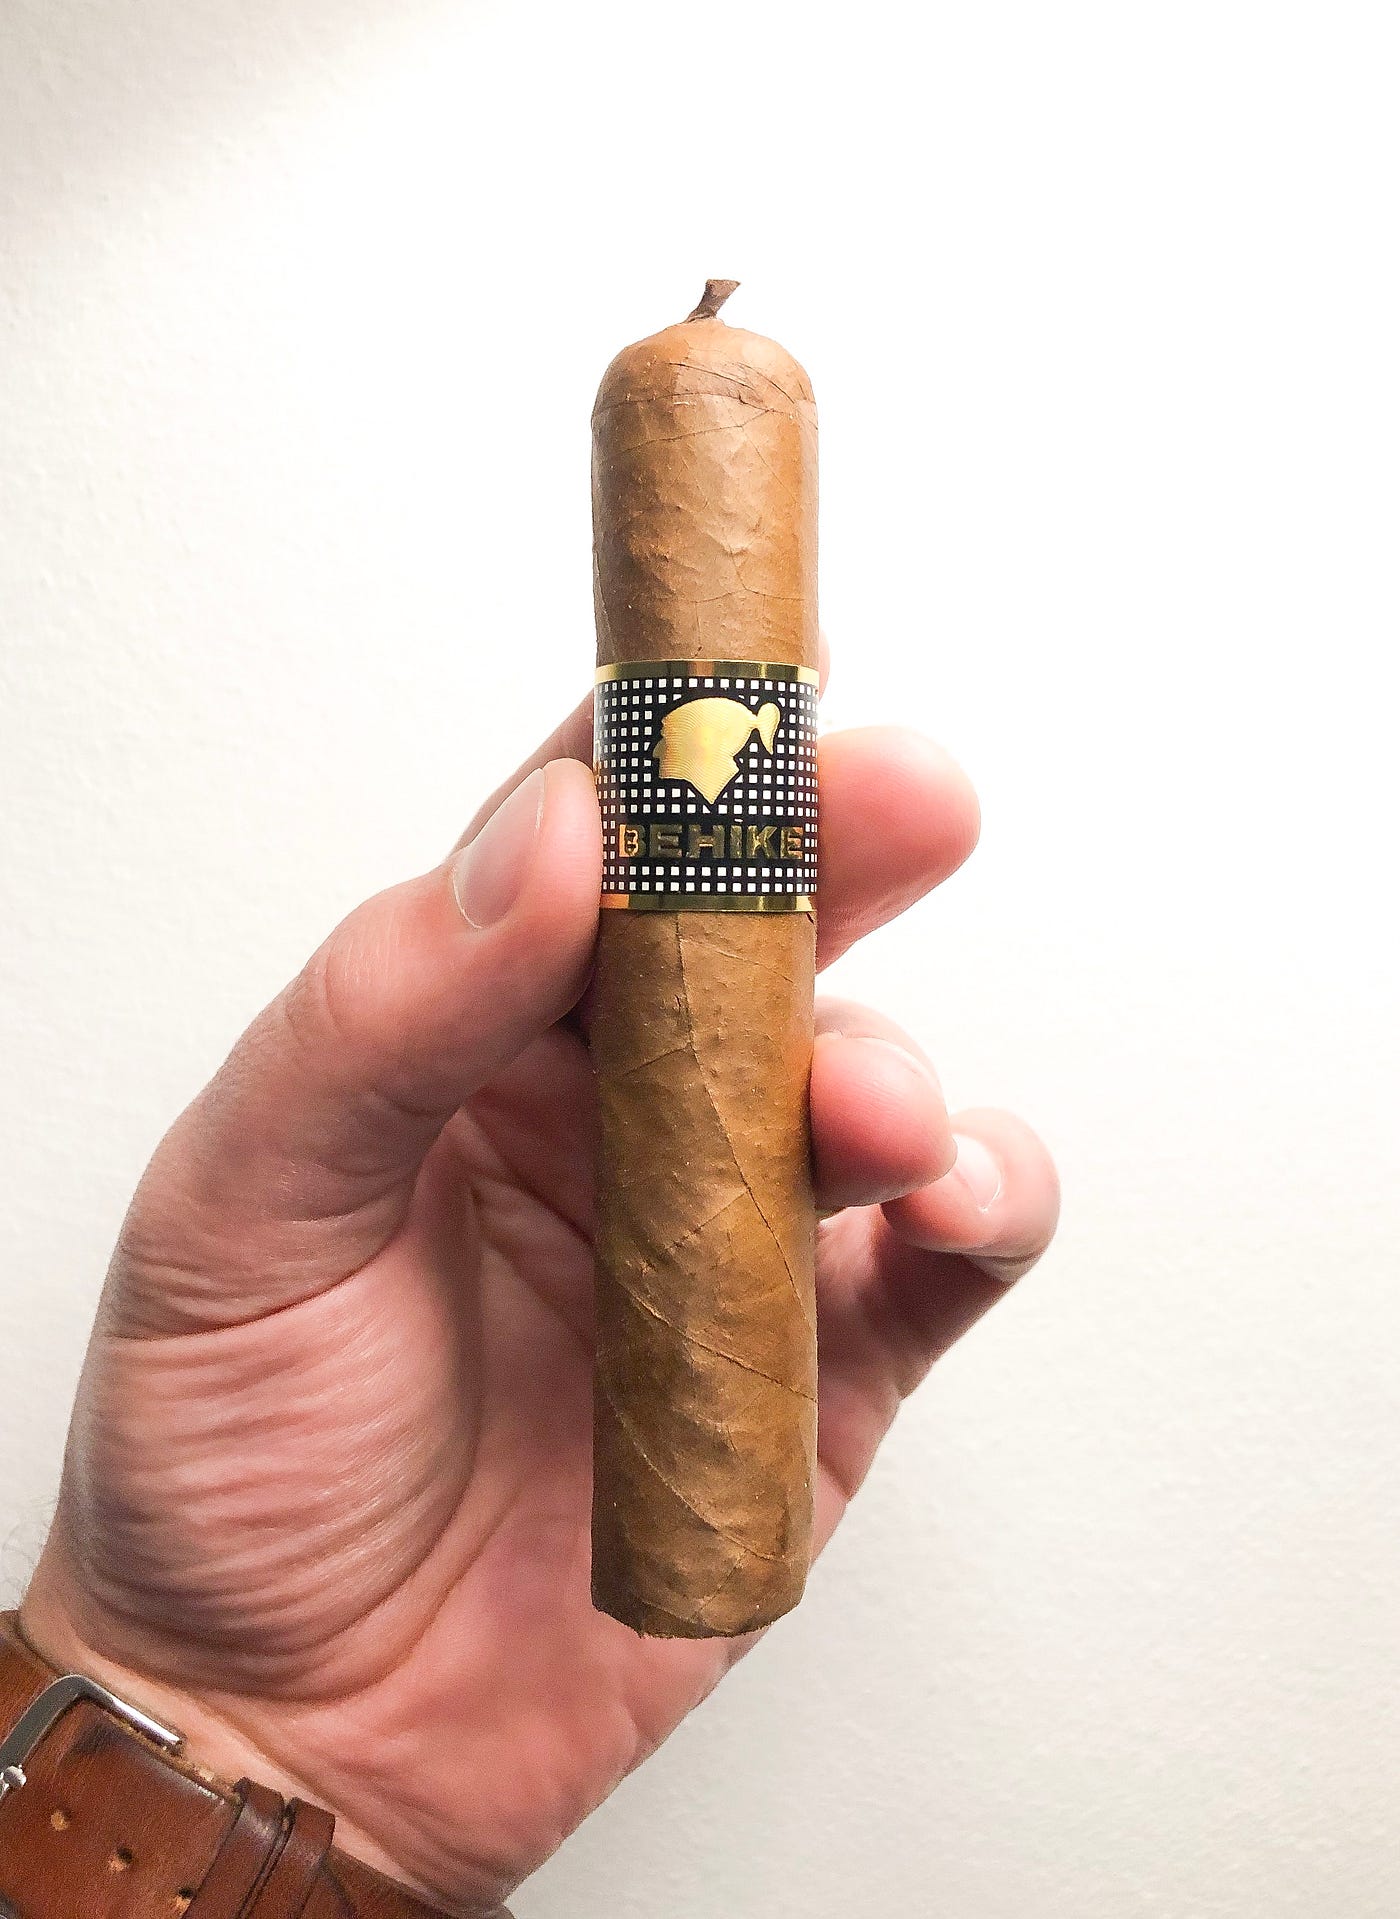 Top 15 Cuban Cigars to have on your humidor. | by All Things Cigars | Medium